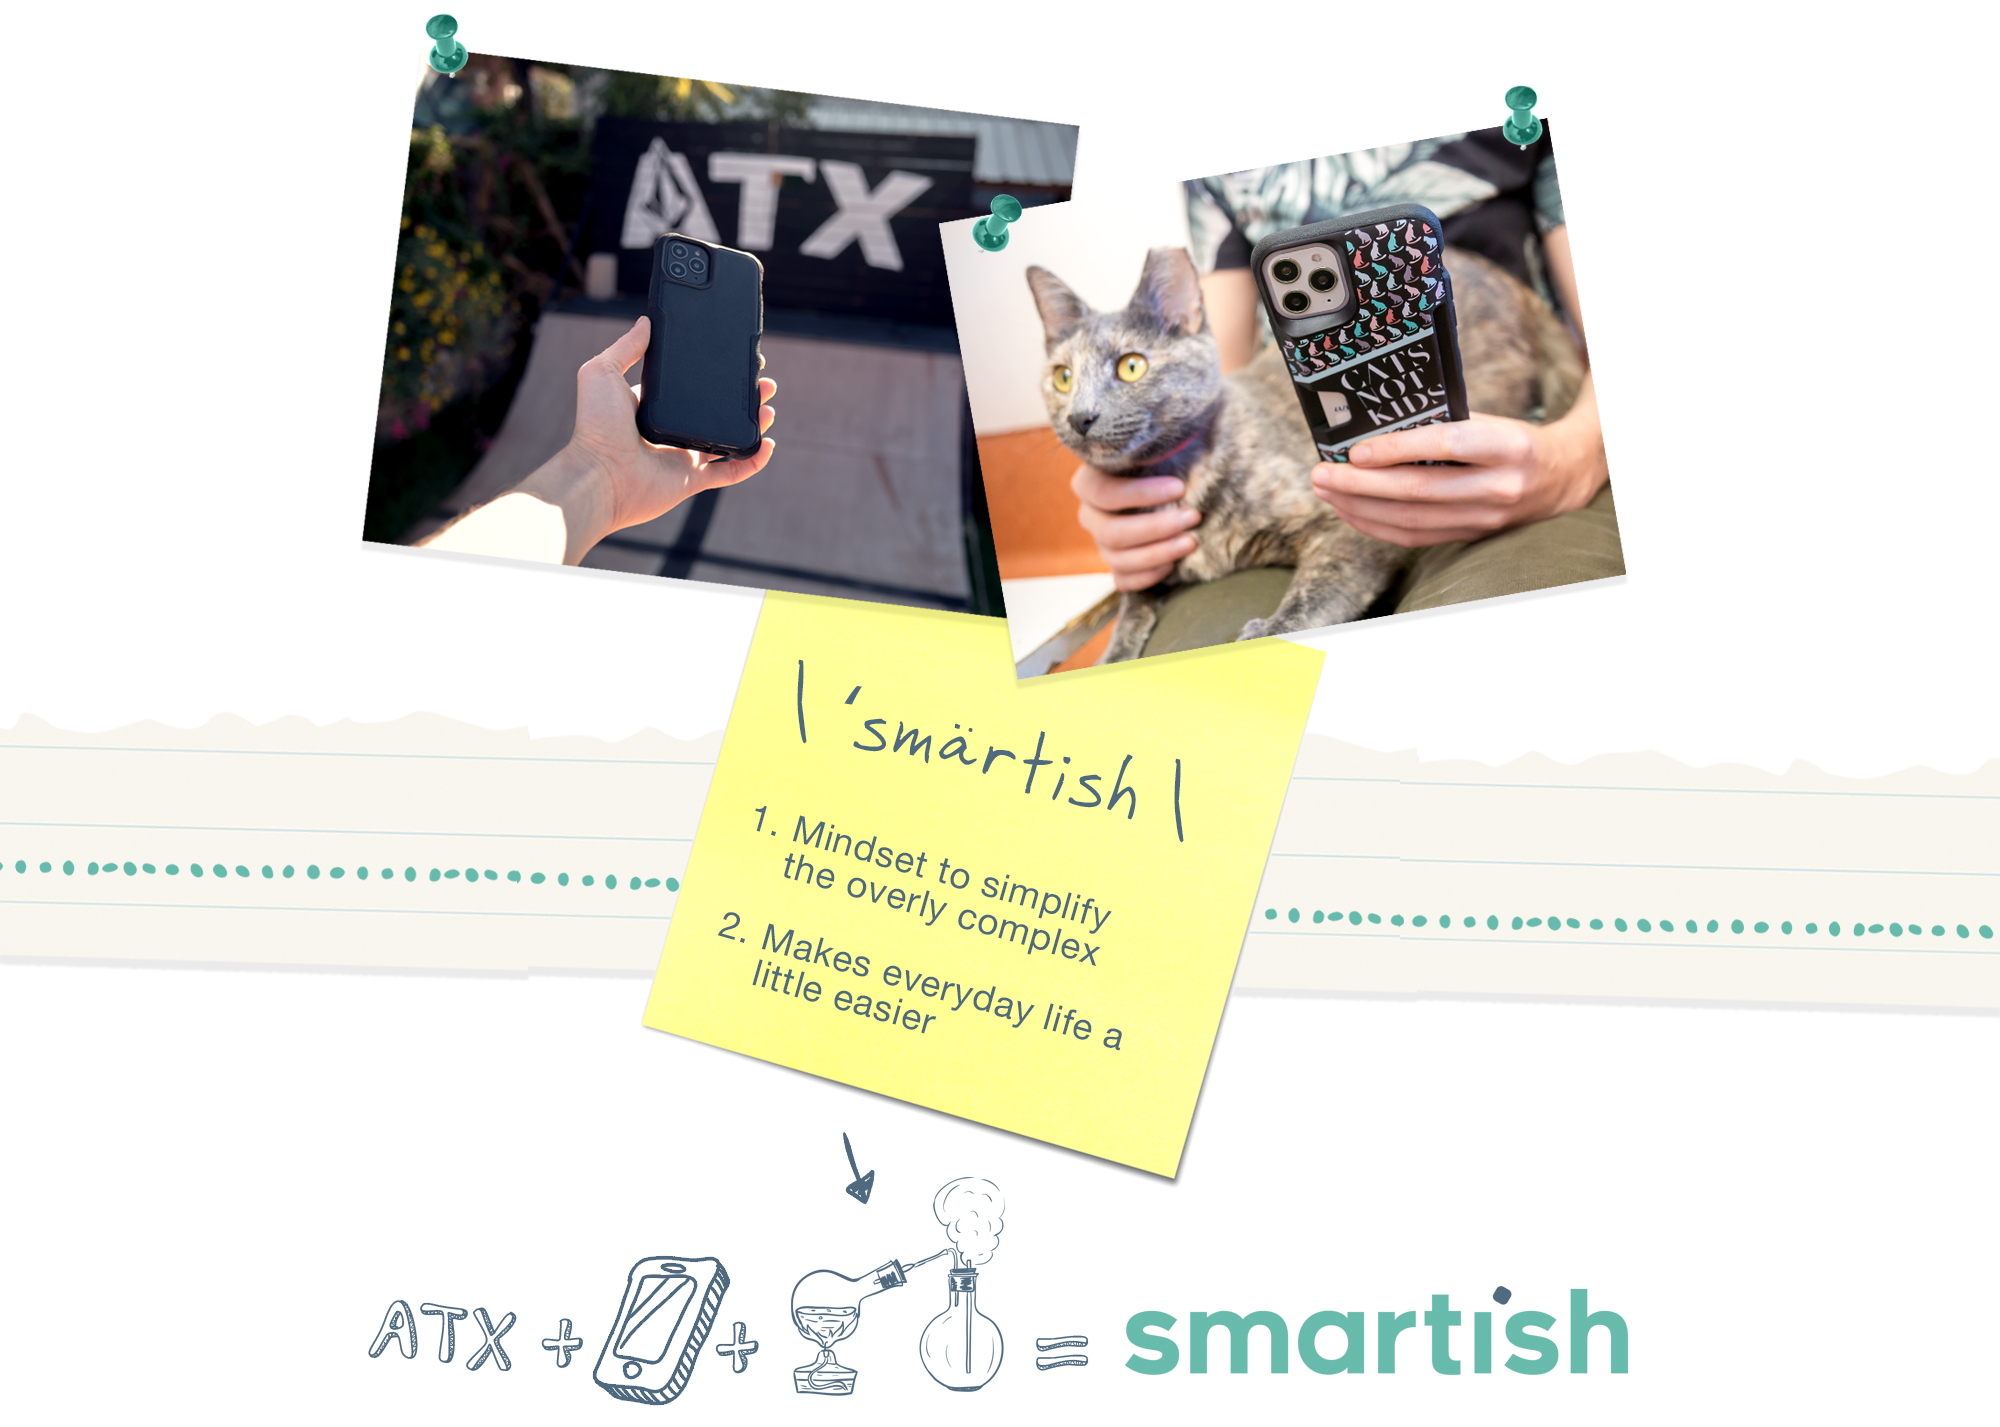 Smartish: 1. Mindset to simplify the overly complex; 2. Makes everyday life a little easier